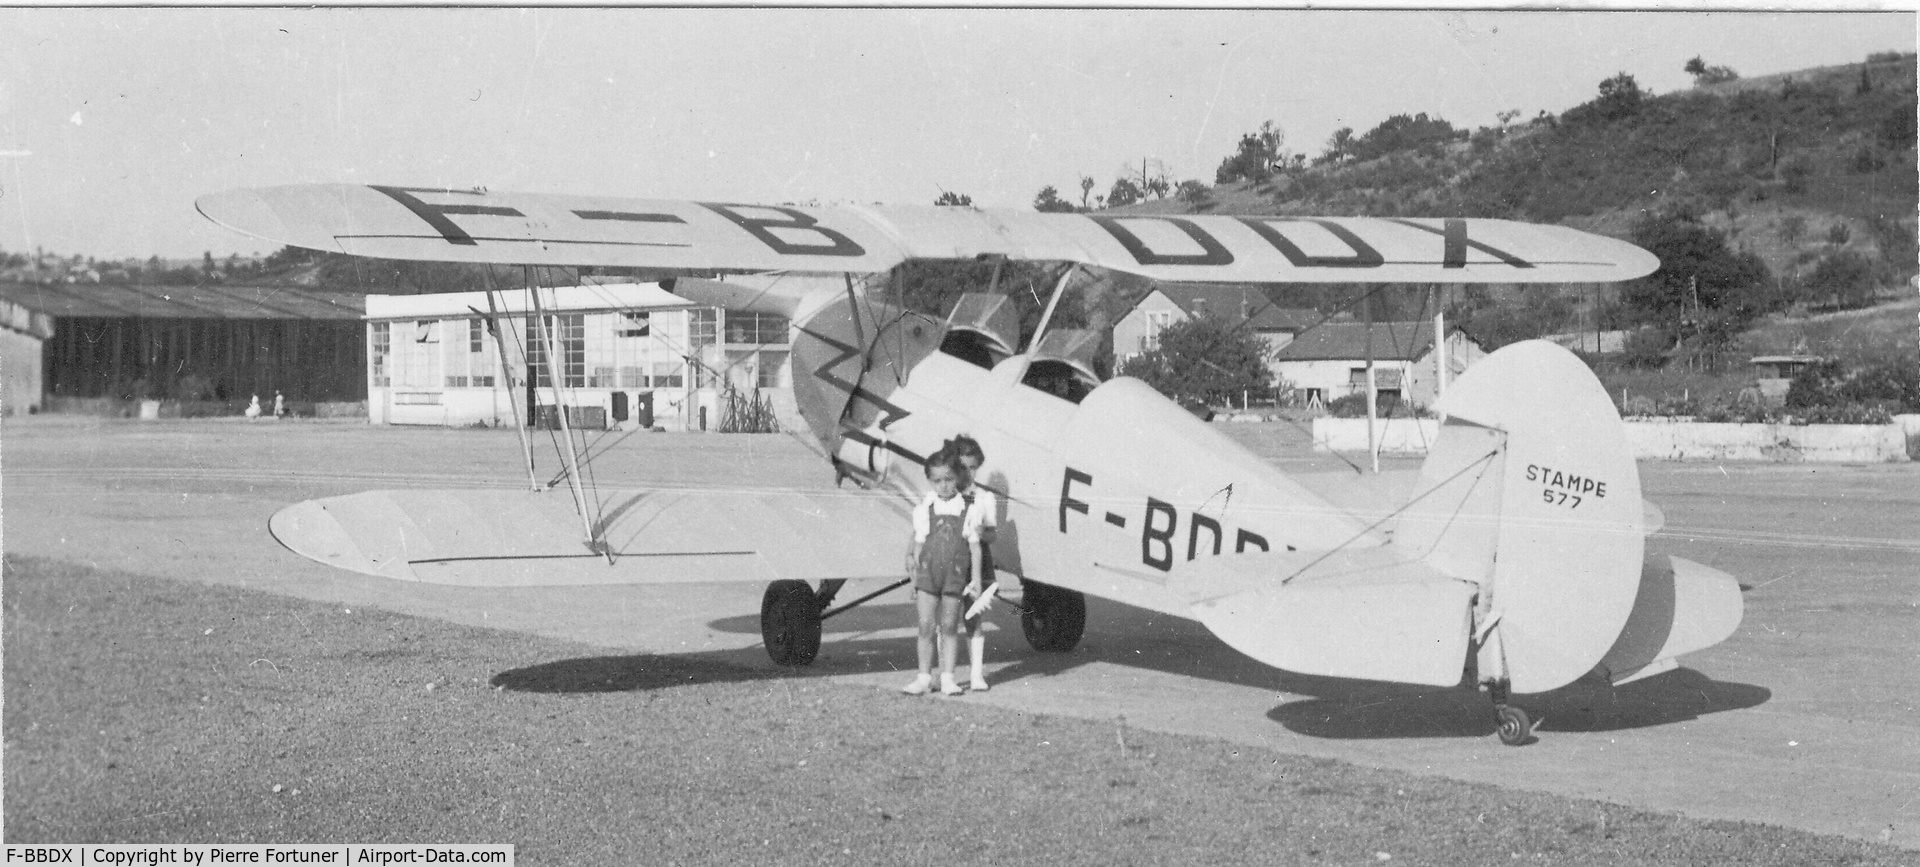 F-BBDX, Nord SV-4C Stampe C/N 50, Vichy Rhue airfield. 1949.
Me (Renaud Fortuner) and my sister in front of F-BDDX